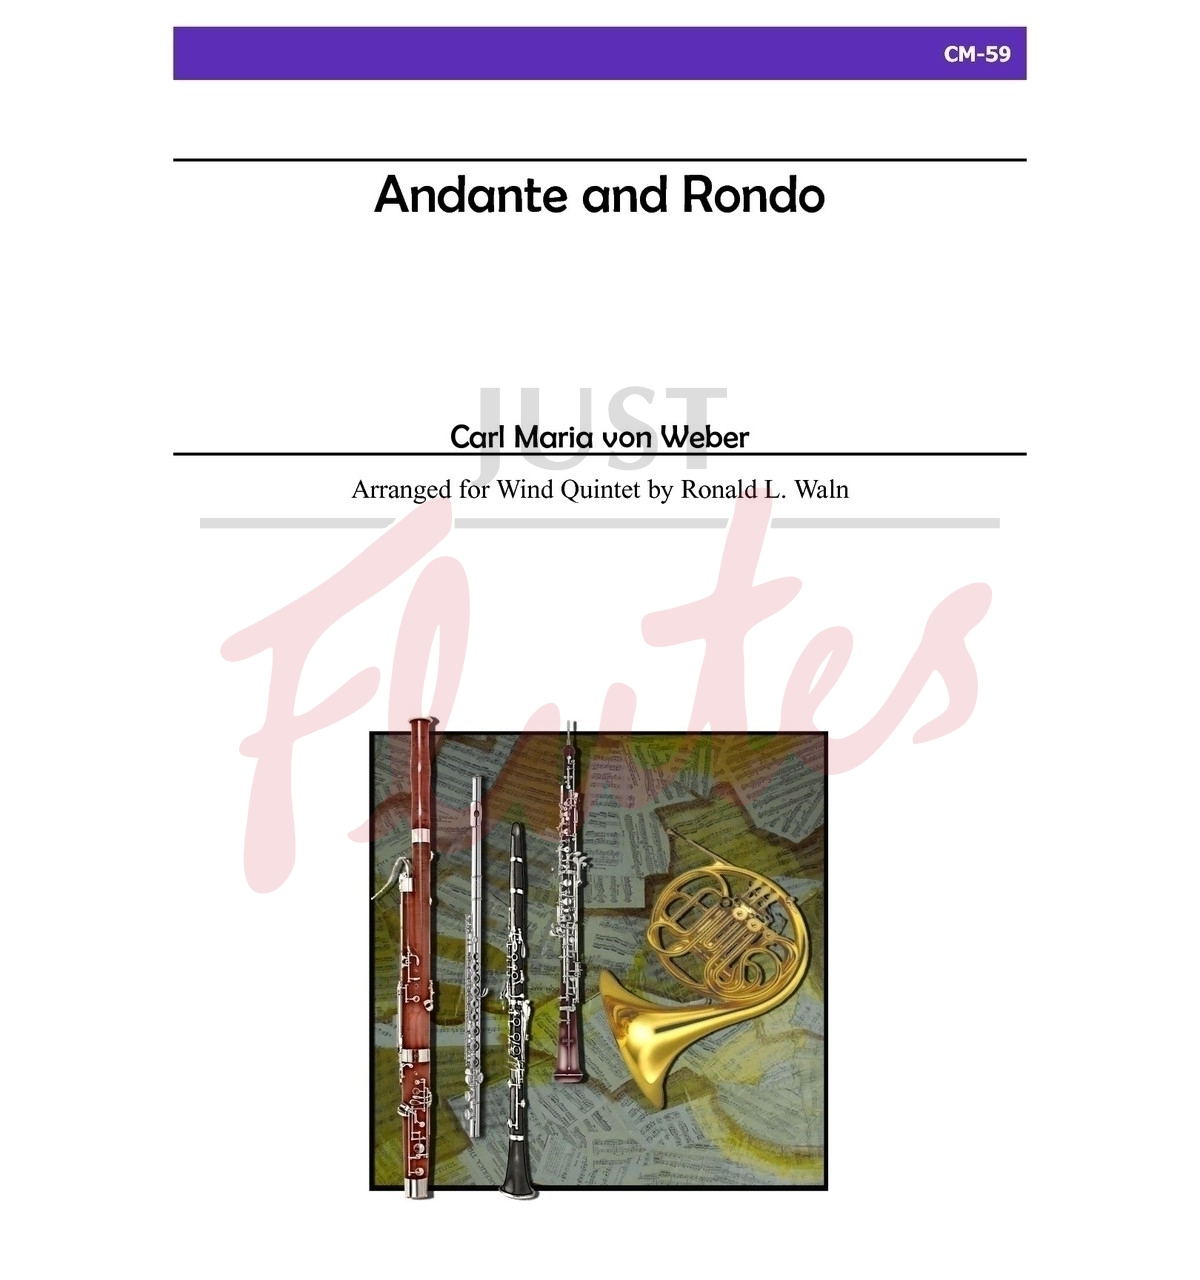 Andante and Rondo arranged for Wind Quintet